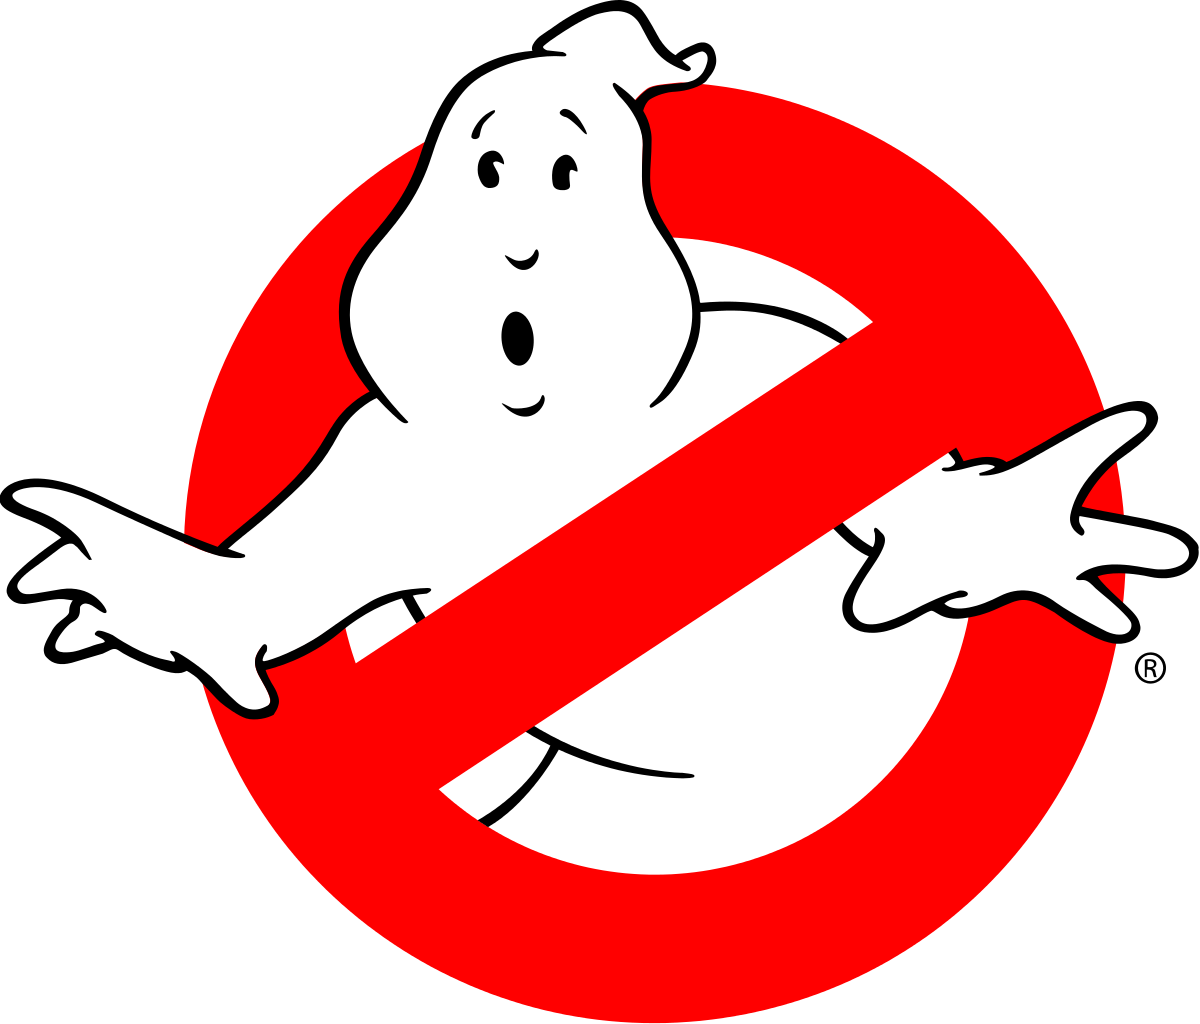 SPP EPISODE 9 OF 2018 - We Ain't Afraid of No Ghost... Celebrating the Ghostbusters, Now &amp; Forever